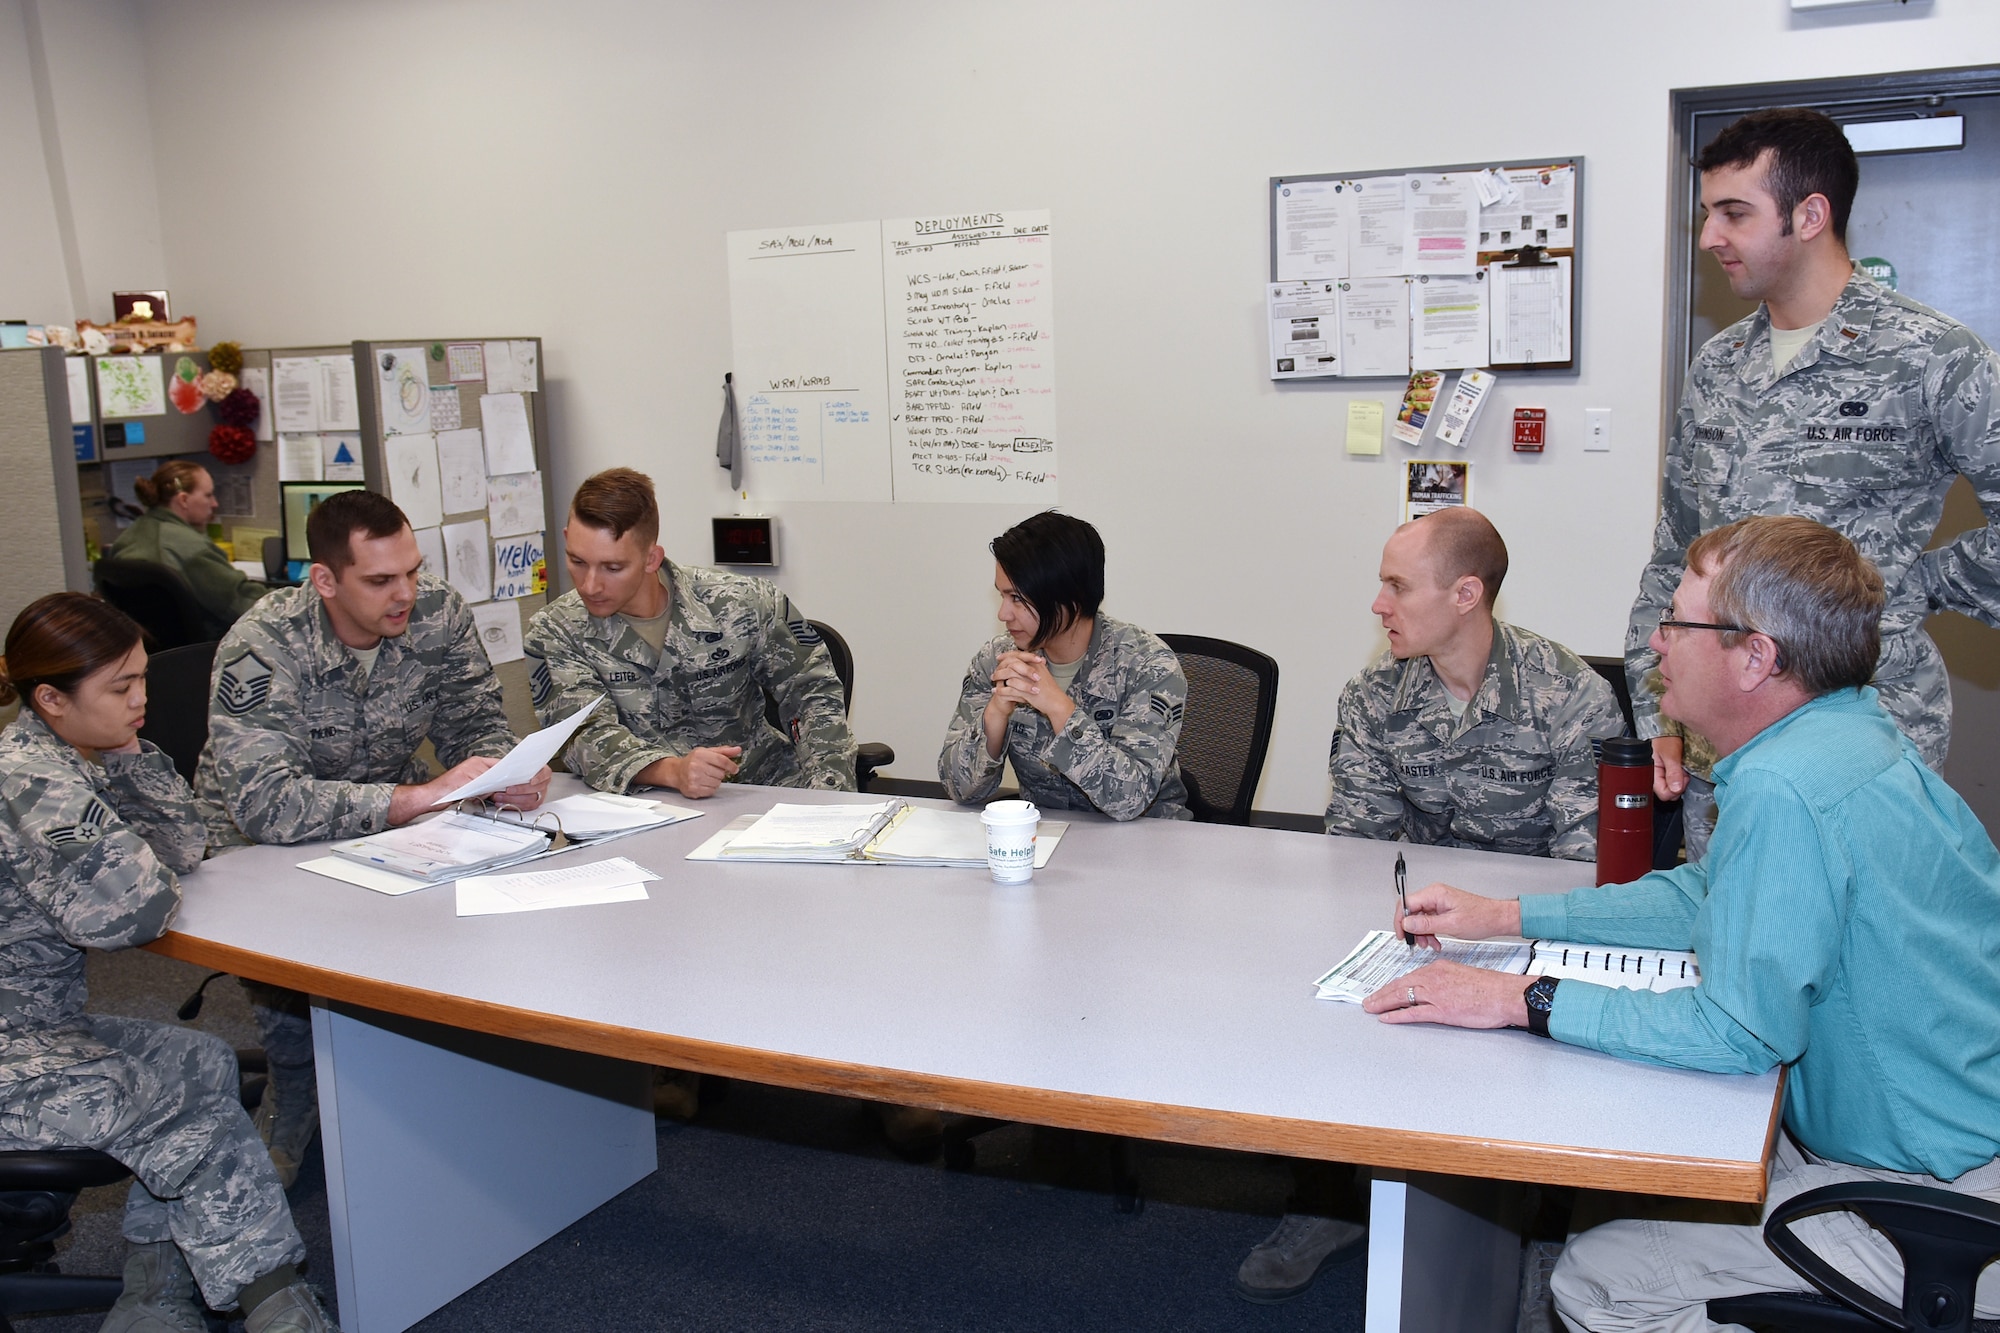 Members of the 509th and 131st Logistics Readiness Squadrons discuss mission planning objectives at Whiteman Air Force Base, Mo., April 25, 2018. Capitalizing on the strengths of the active duty and the Air National Guard keeps the total force team competitive for honors such as the Maj. Gen. Warren R. Carter Logistics Readiness Award. (U.S. Air National Guard photo by Senior Master Sgt. Mary-Dale Amison)